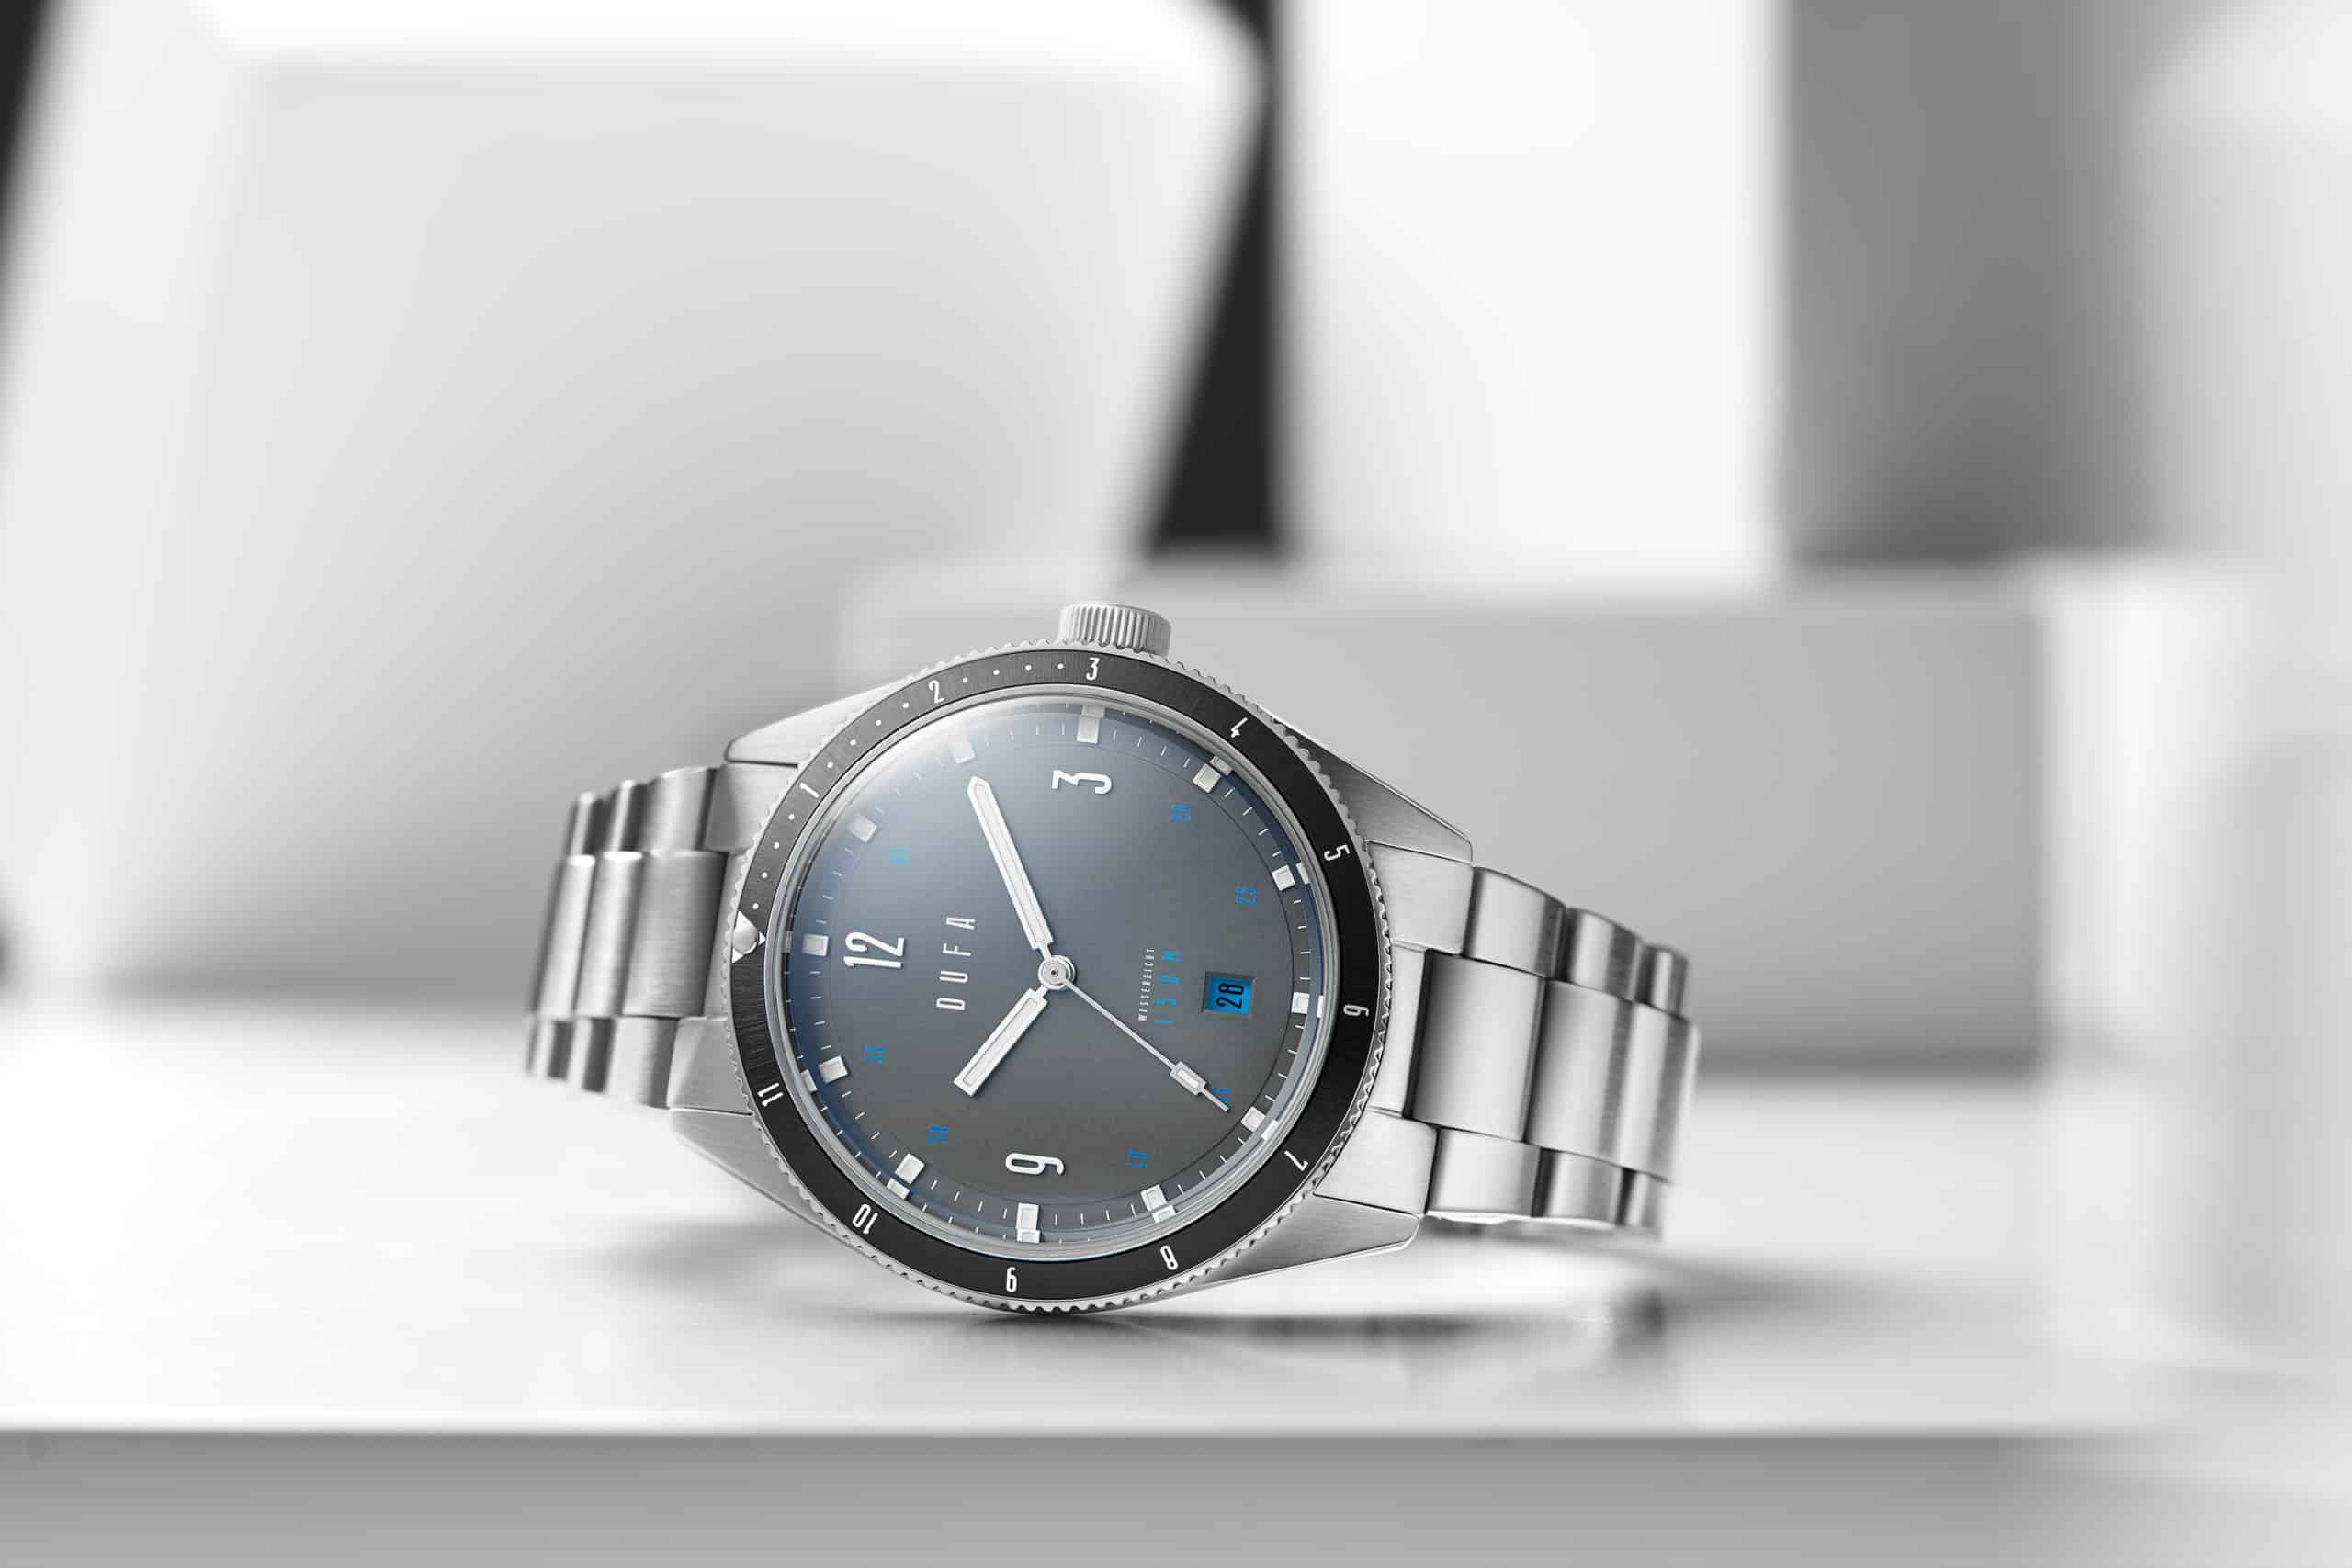 Discovering The DuFa Freitaucher, A Bauhaus Inspired Dive Watch With Soul